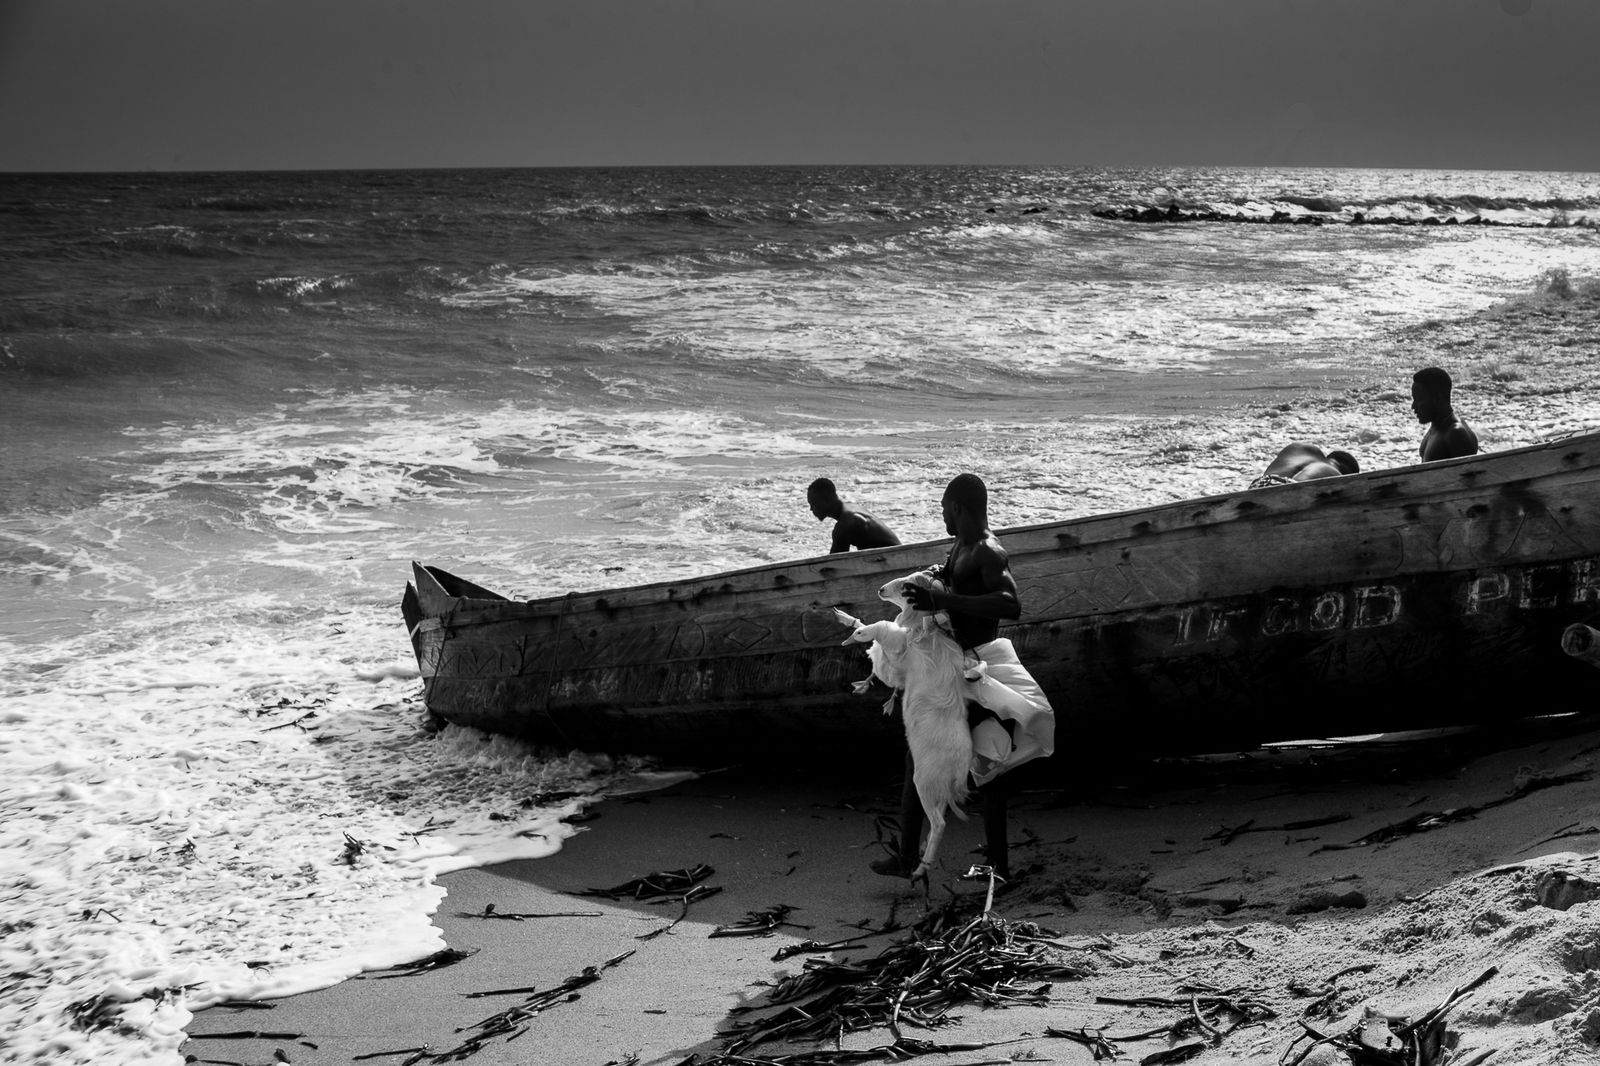 © Ofoe Amegavie - Image from the Between Sand and Water photography project